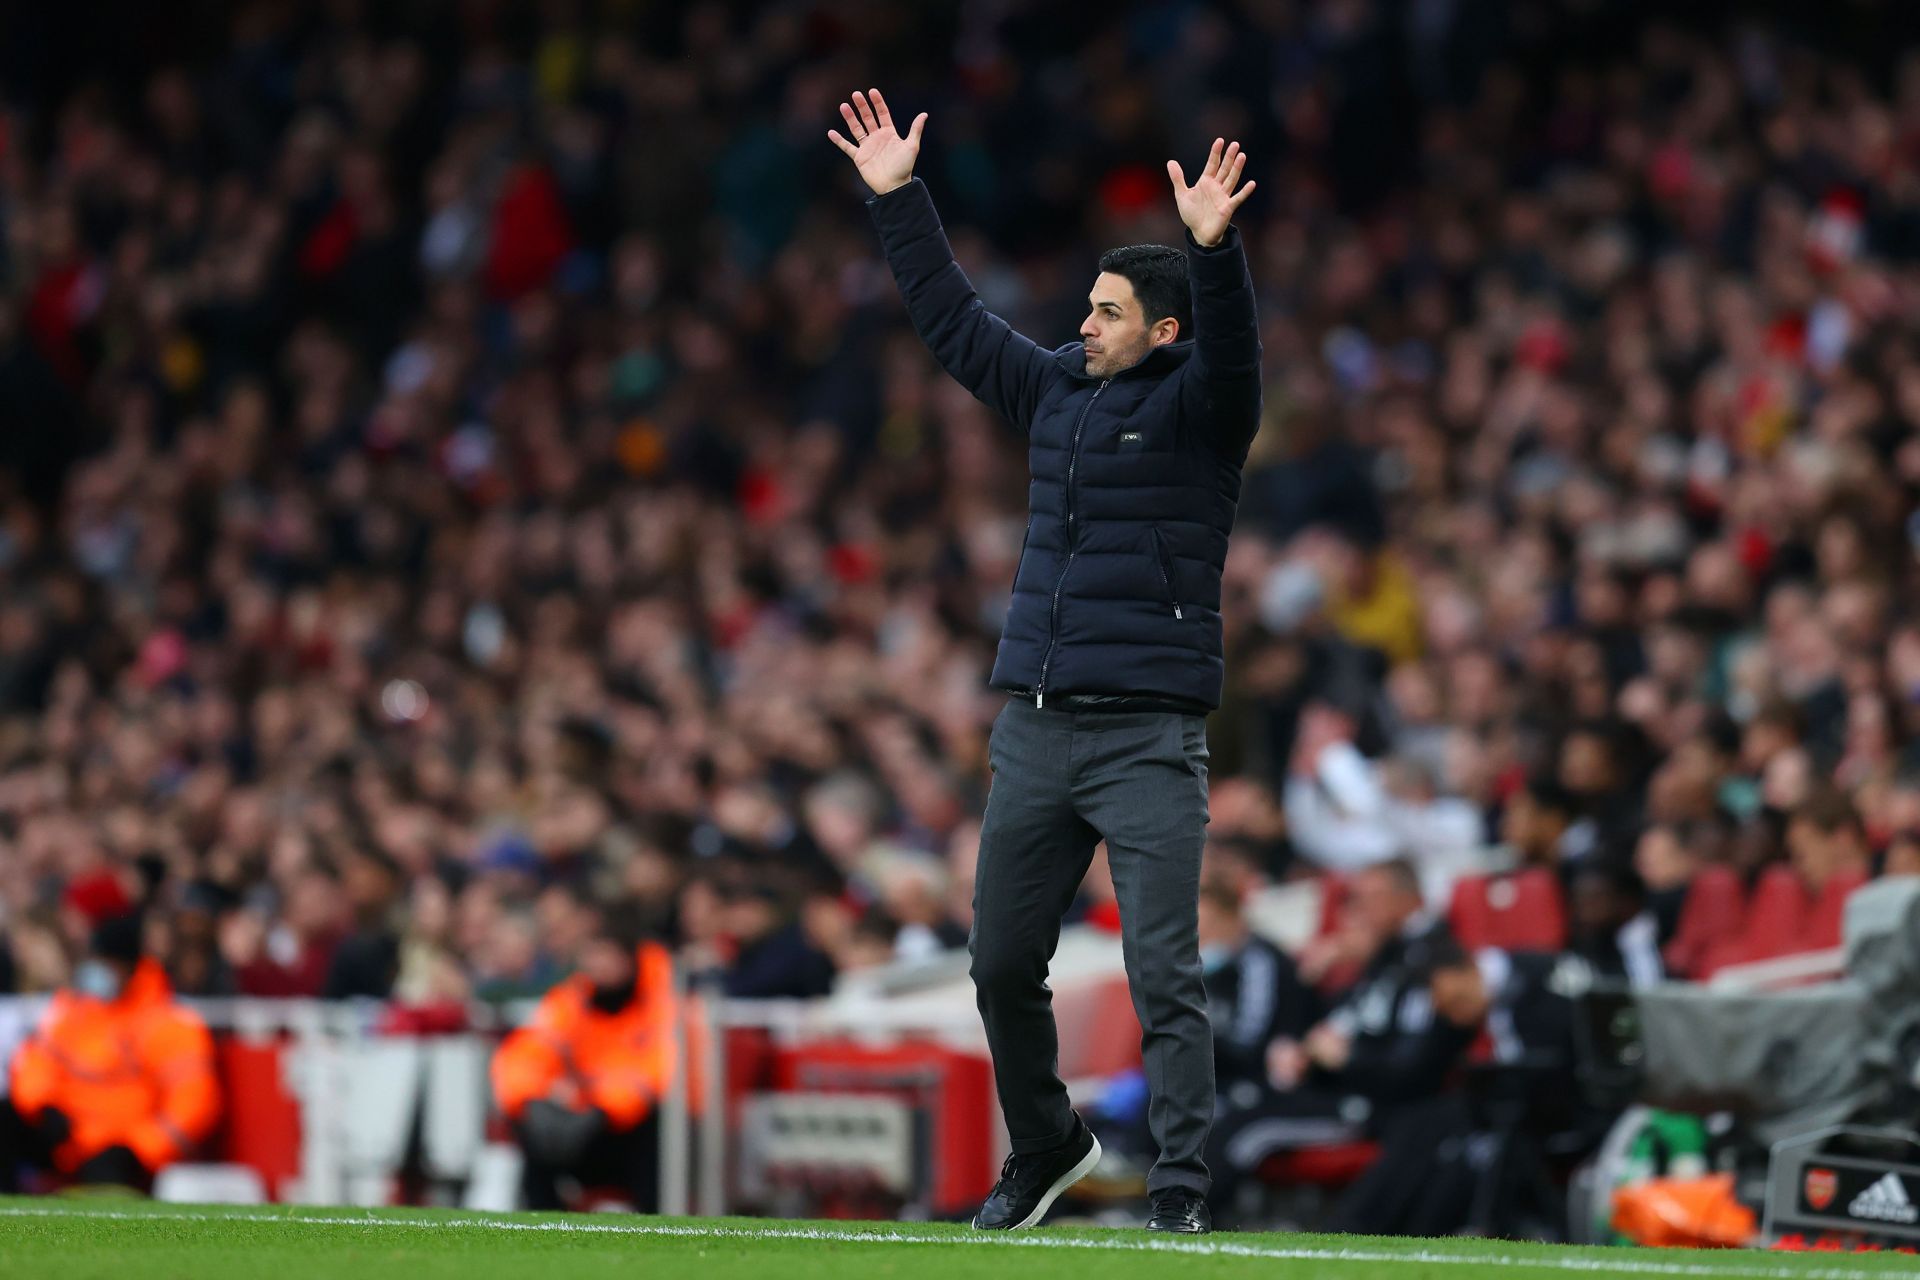 Arsenal manager Mikel Arteta is preparing to face Crystal Palace.